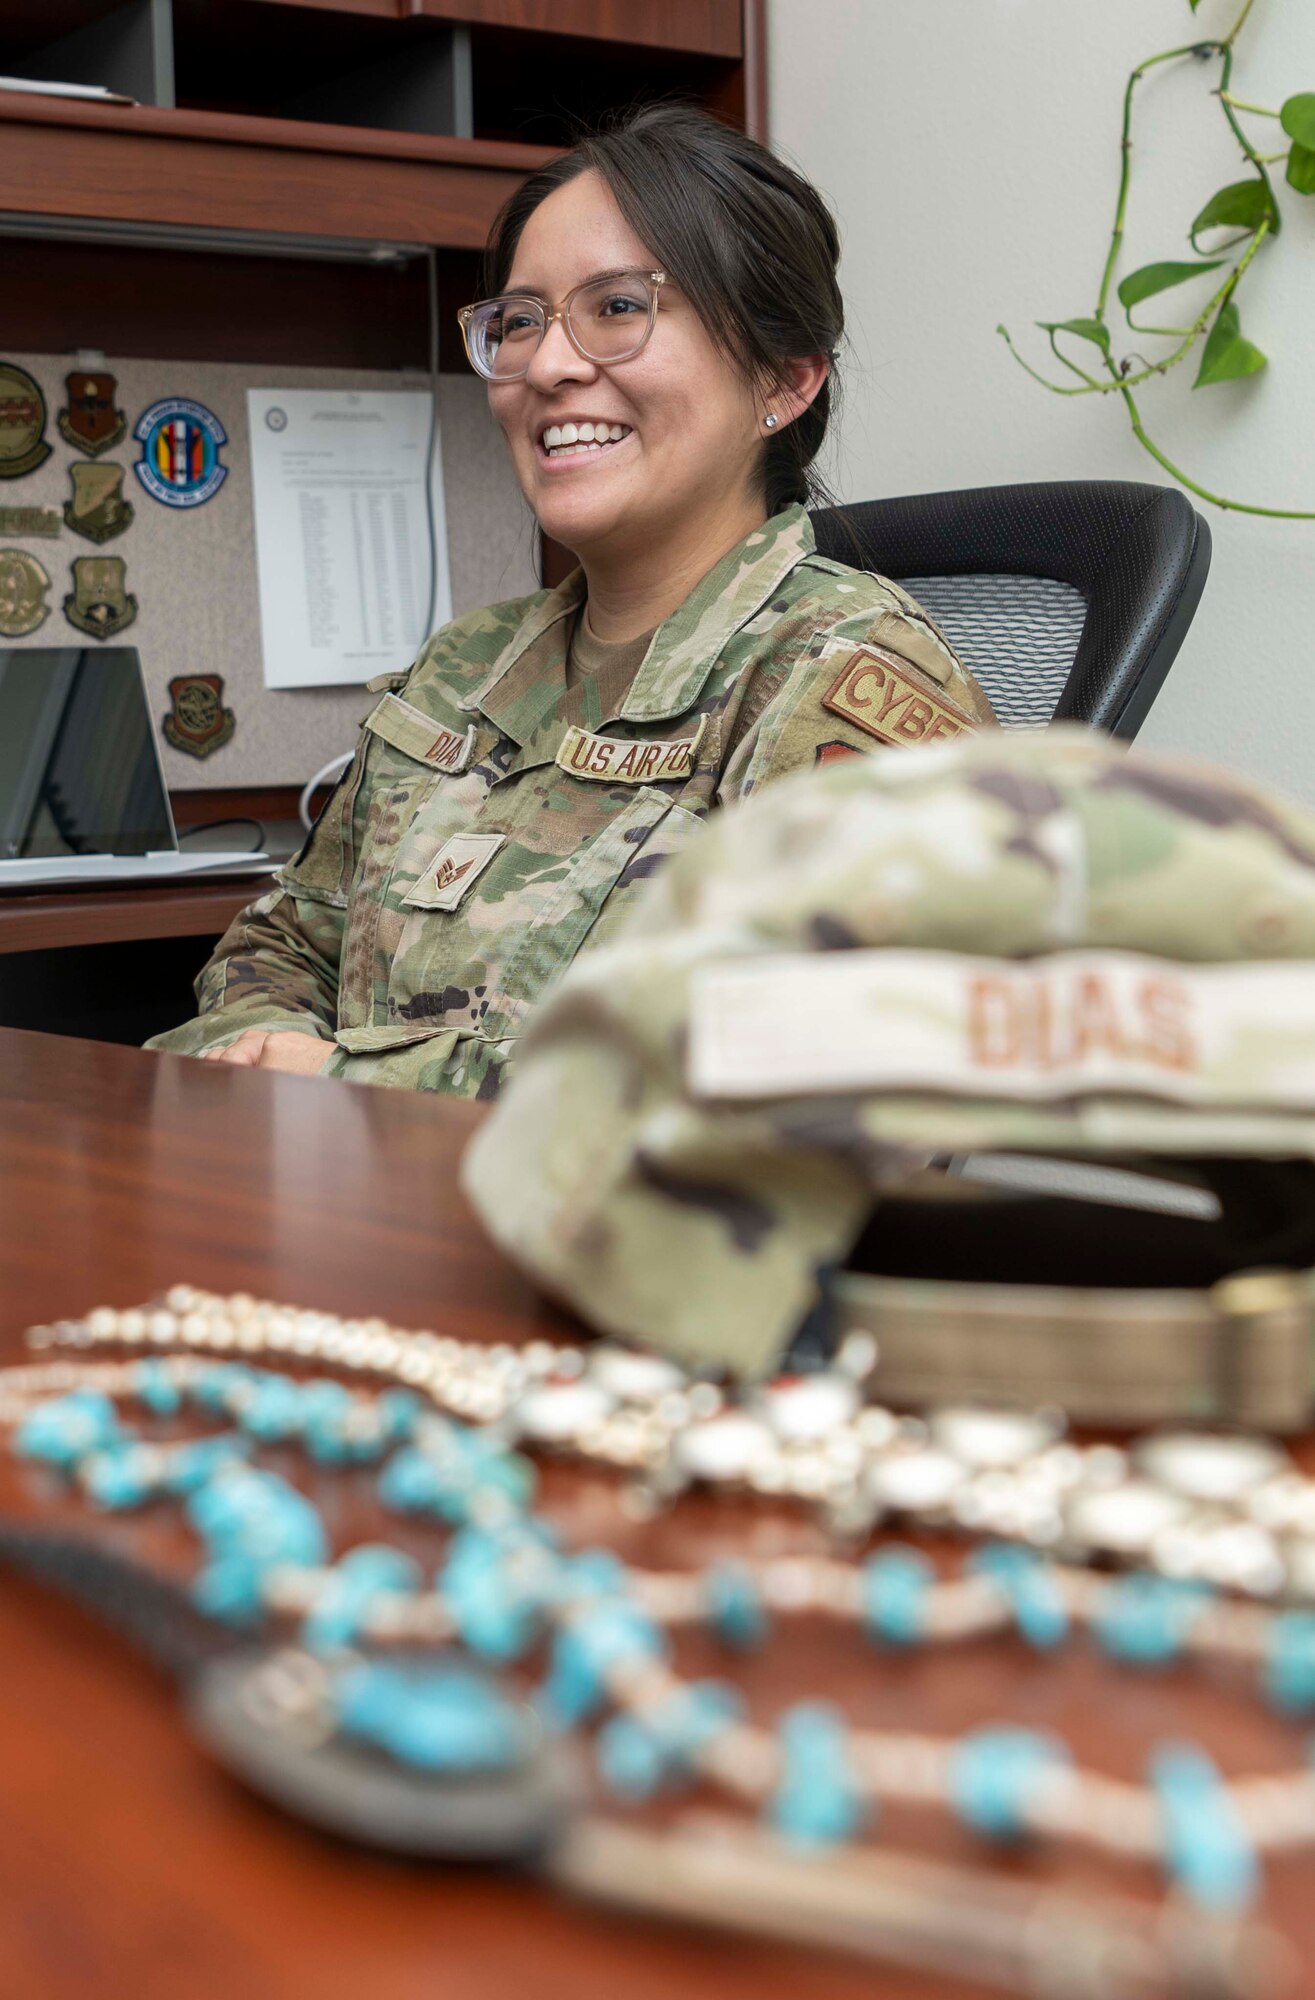 An Airman laughs at her workplace desk.